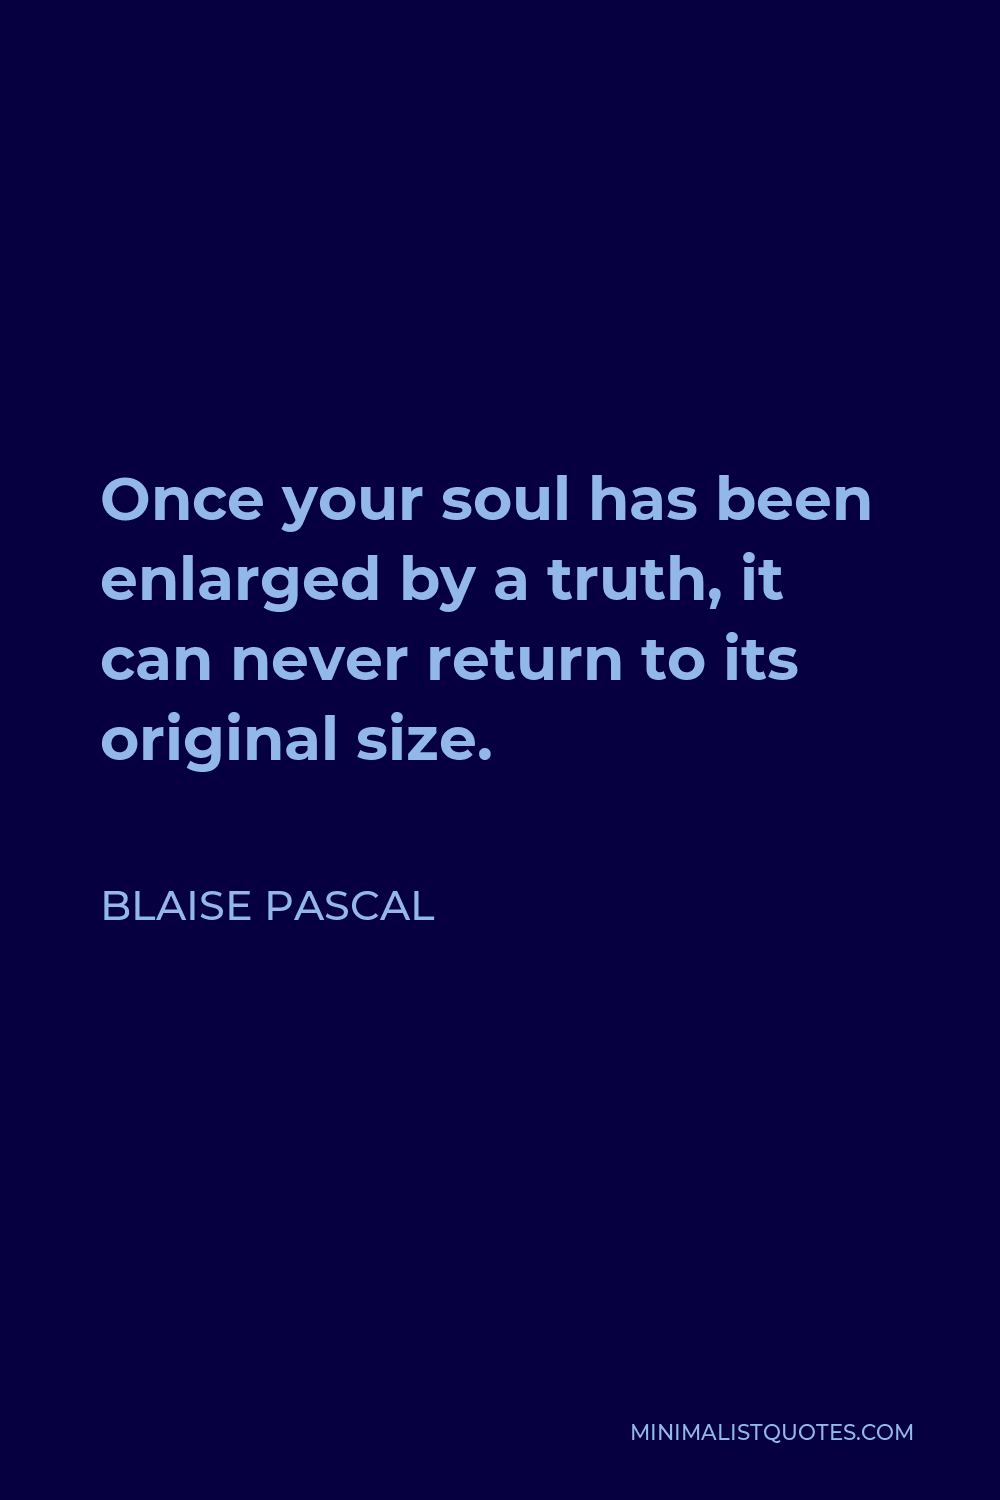 Blaise Pascal Quote - Once your soul has been enlarged by a truth, it can never return to its original size.